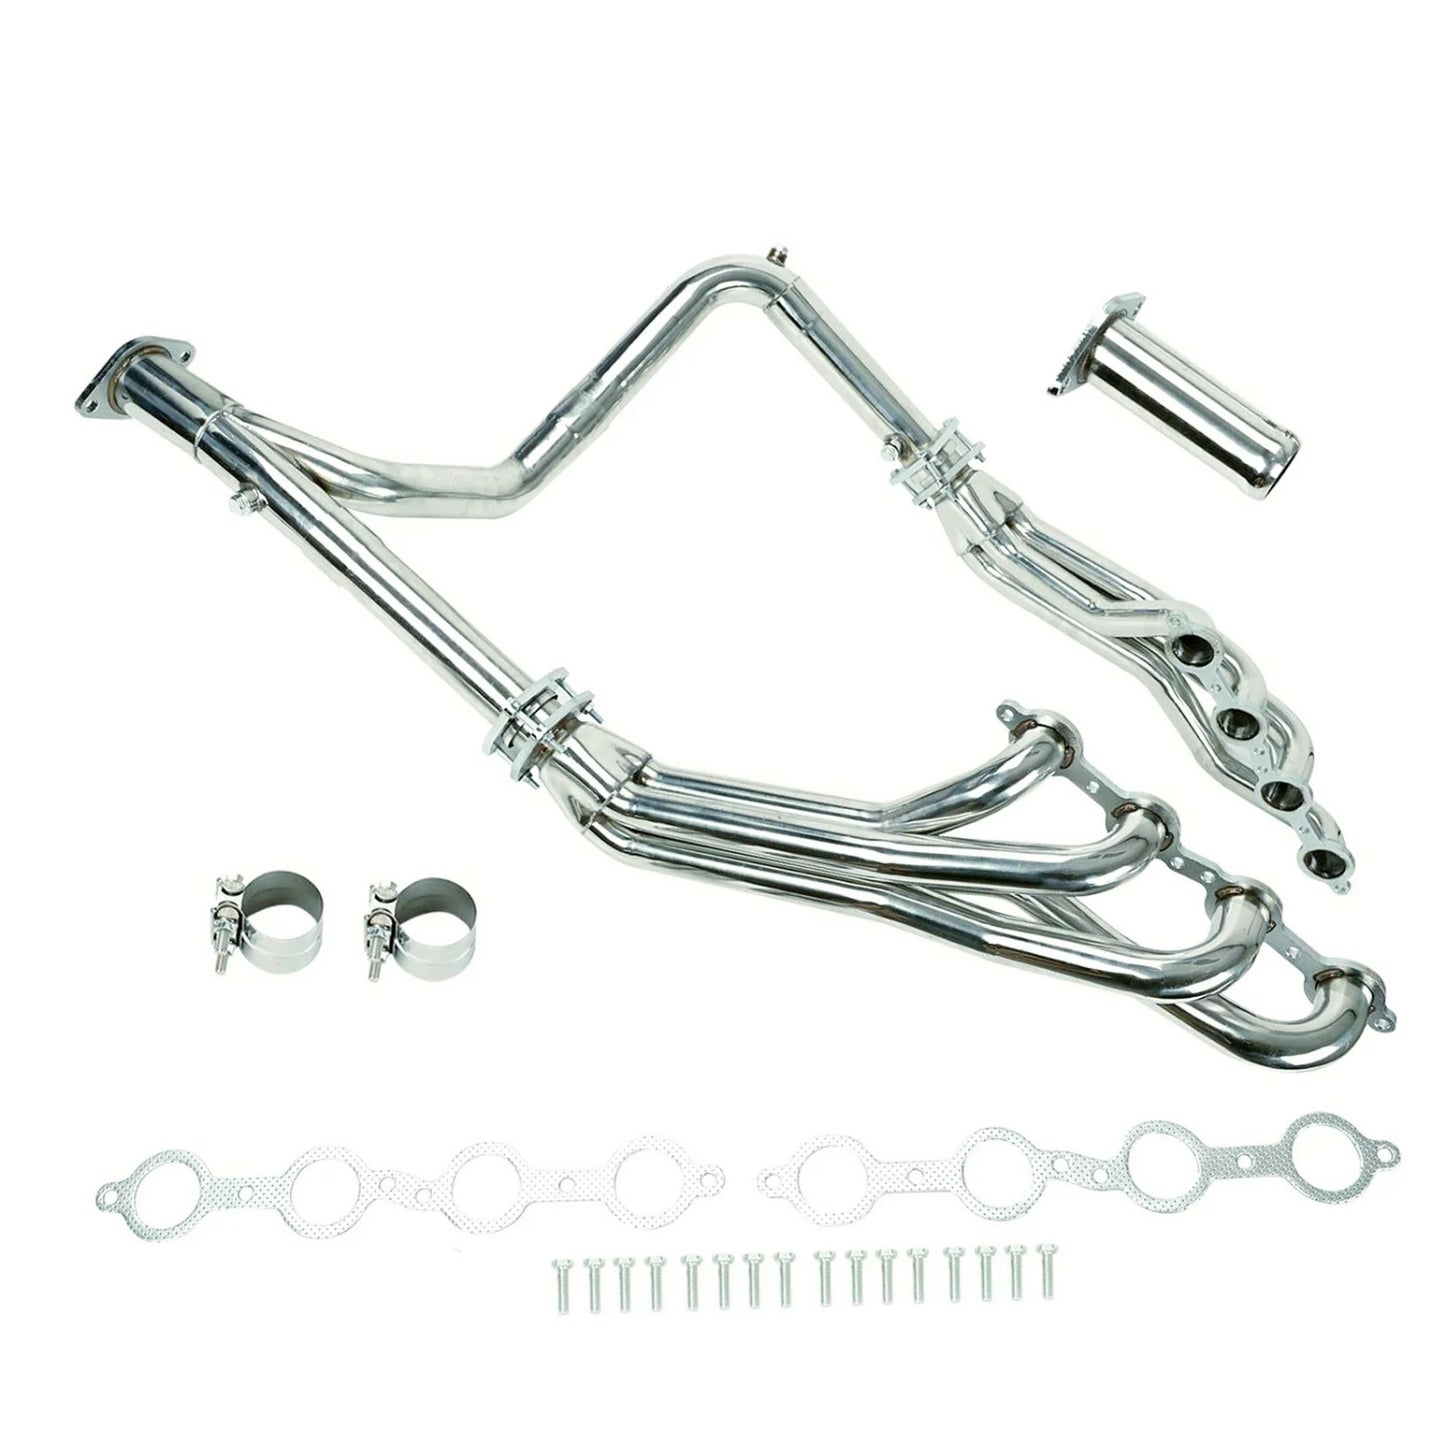 Long Tube Stainless Steel Headers W/ Y Pipe For Chevy GMC 07-14 4.8L 5.3L 6.0L 6.2L Exhaust Header